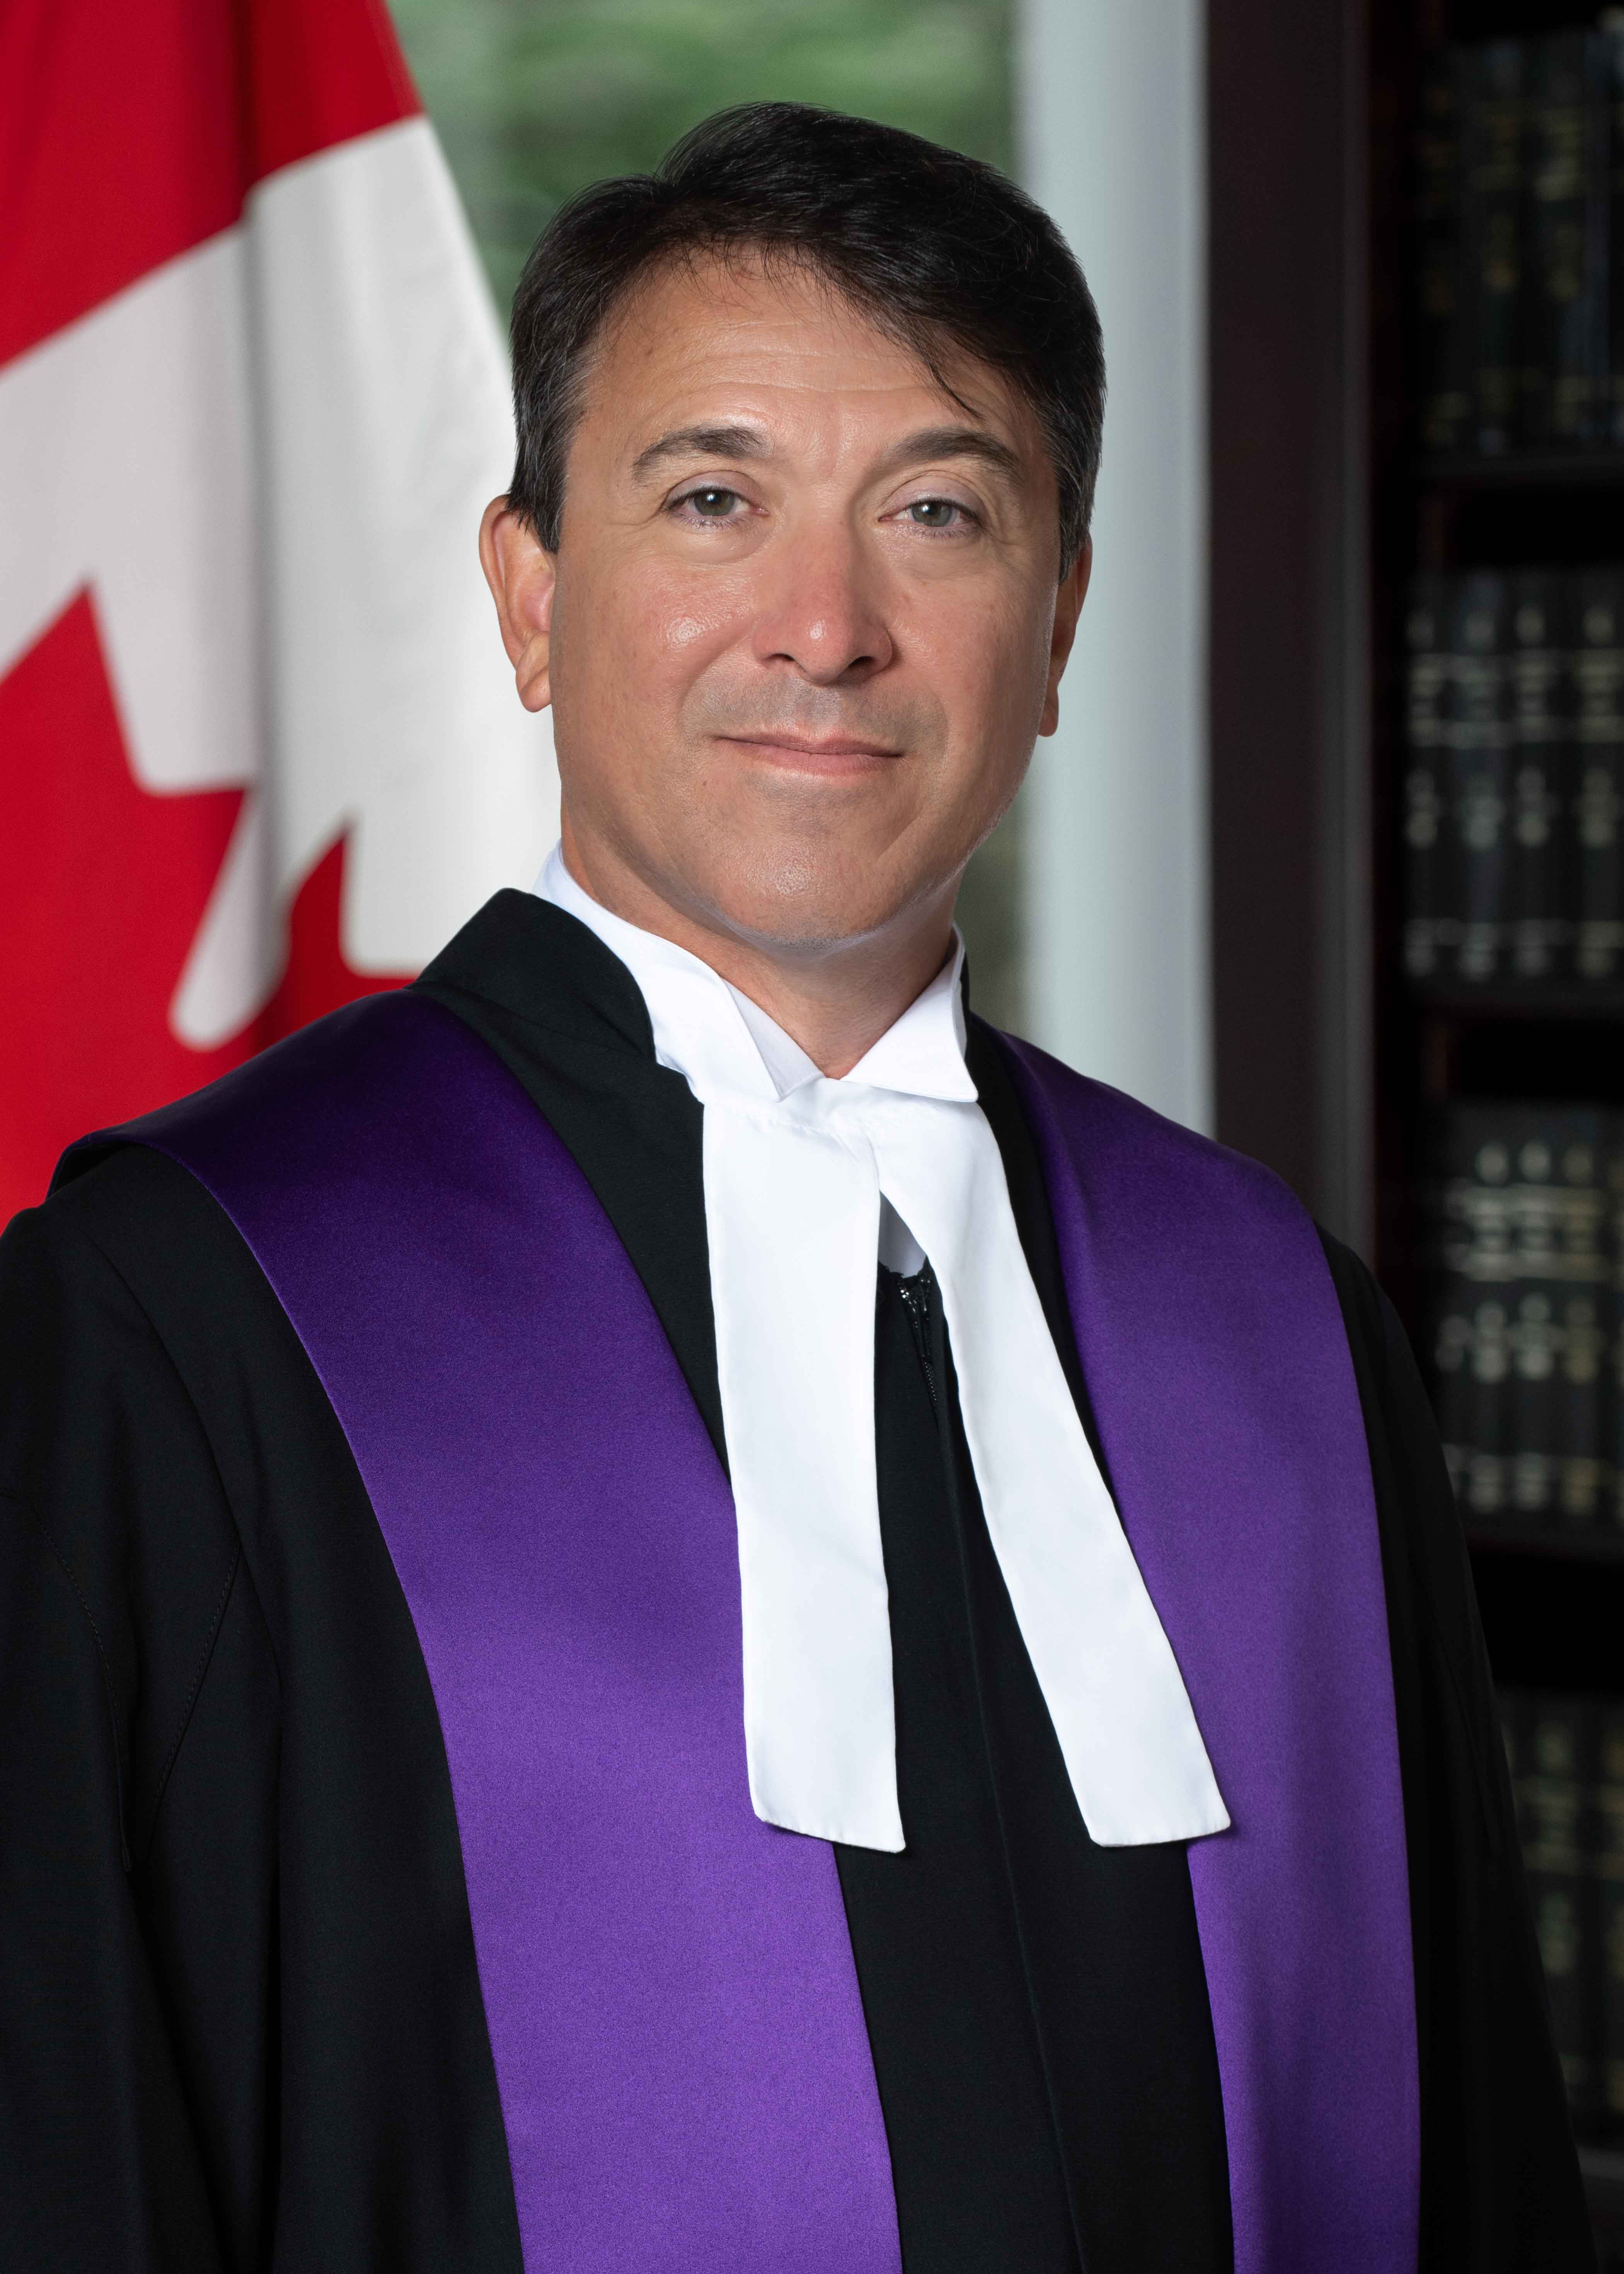 image: The Honourable Guy R. Smith